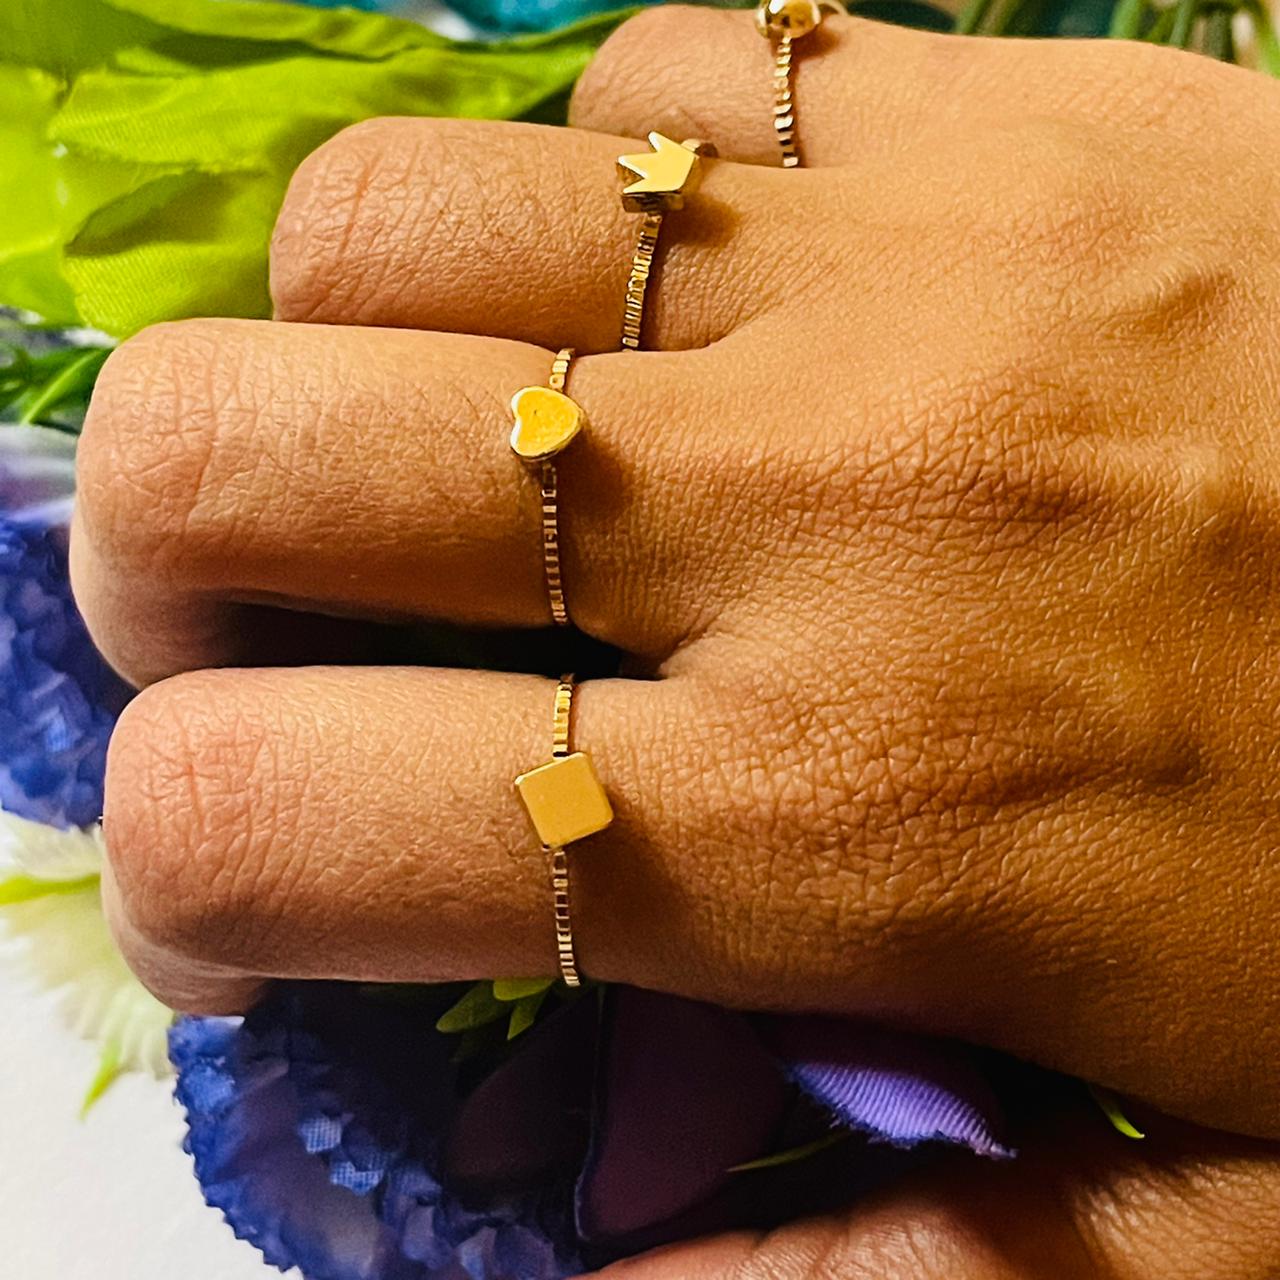 Gold Plated Rings